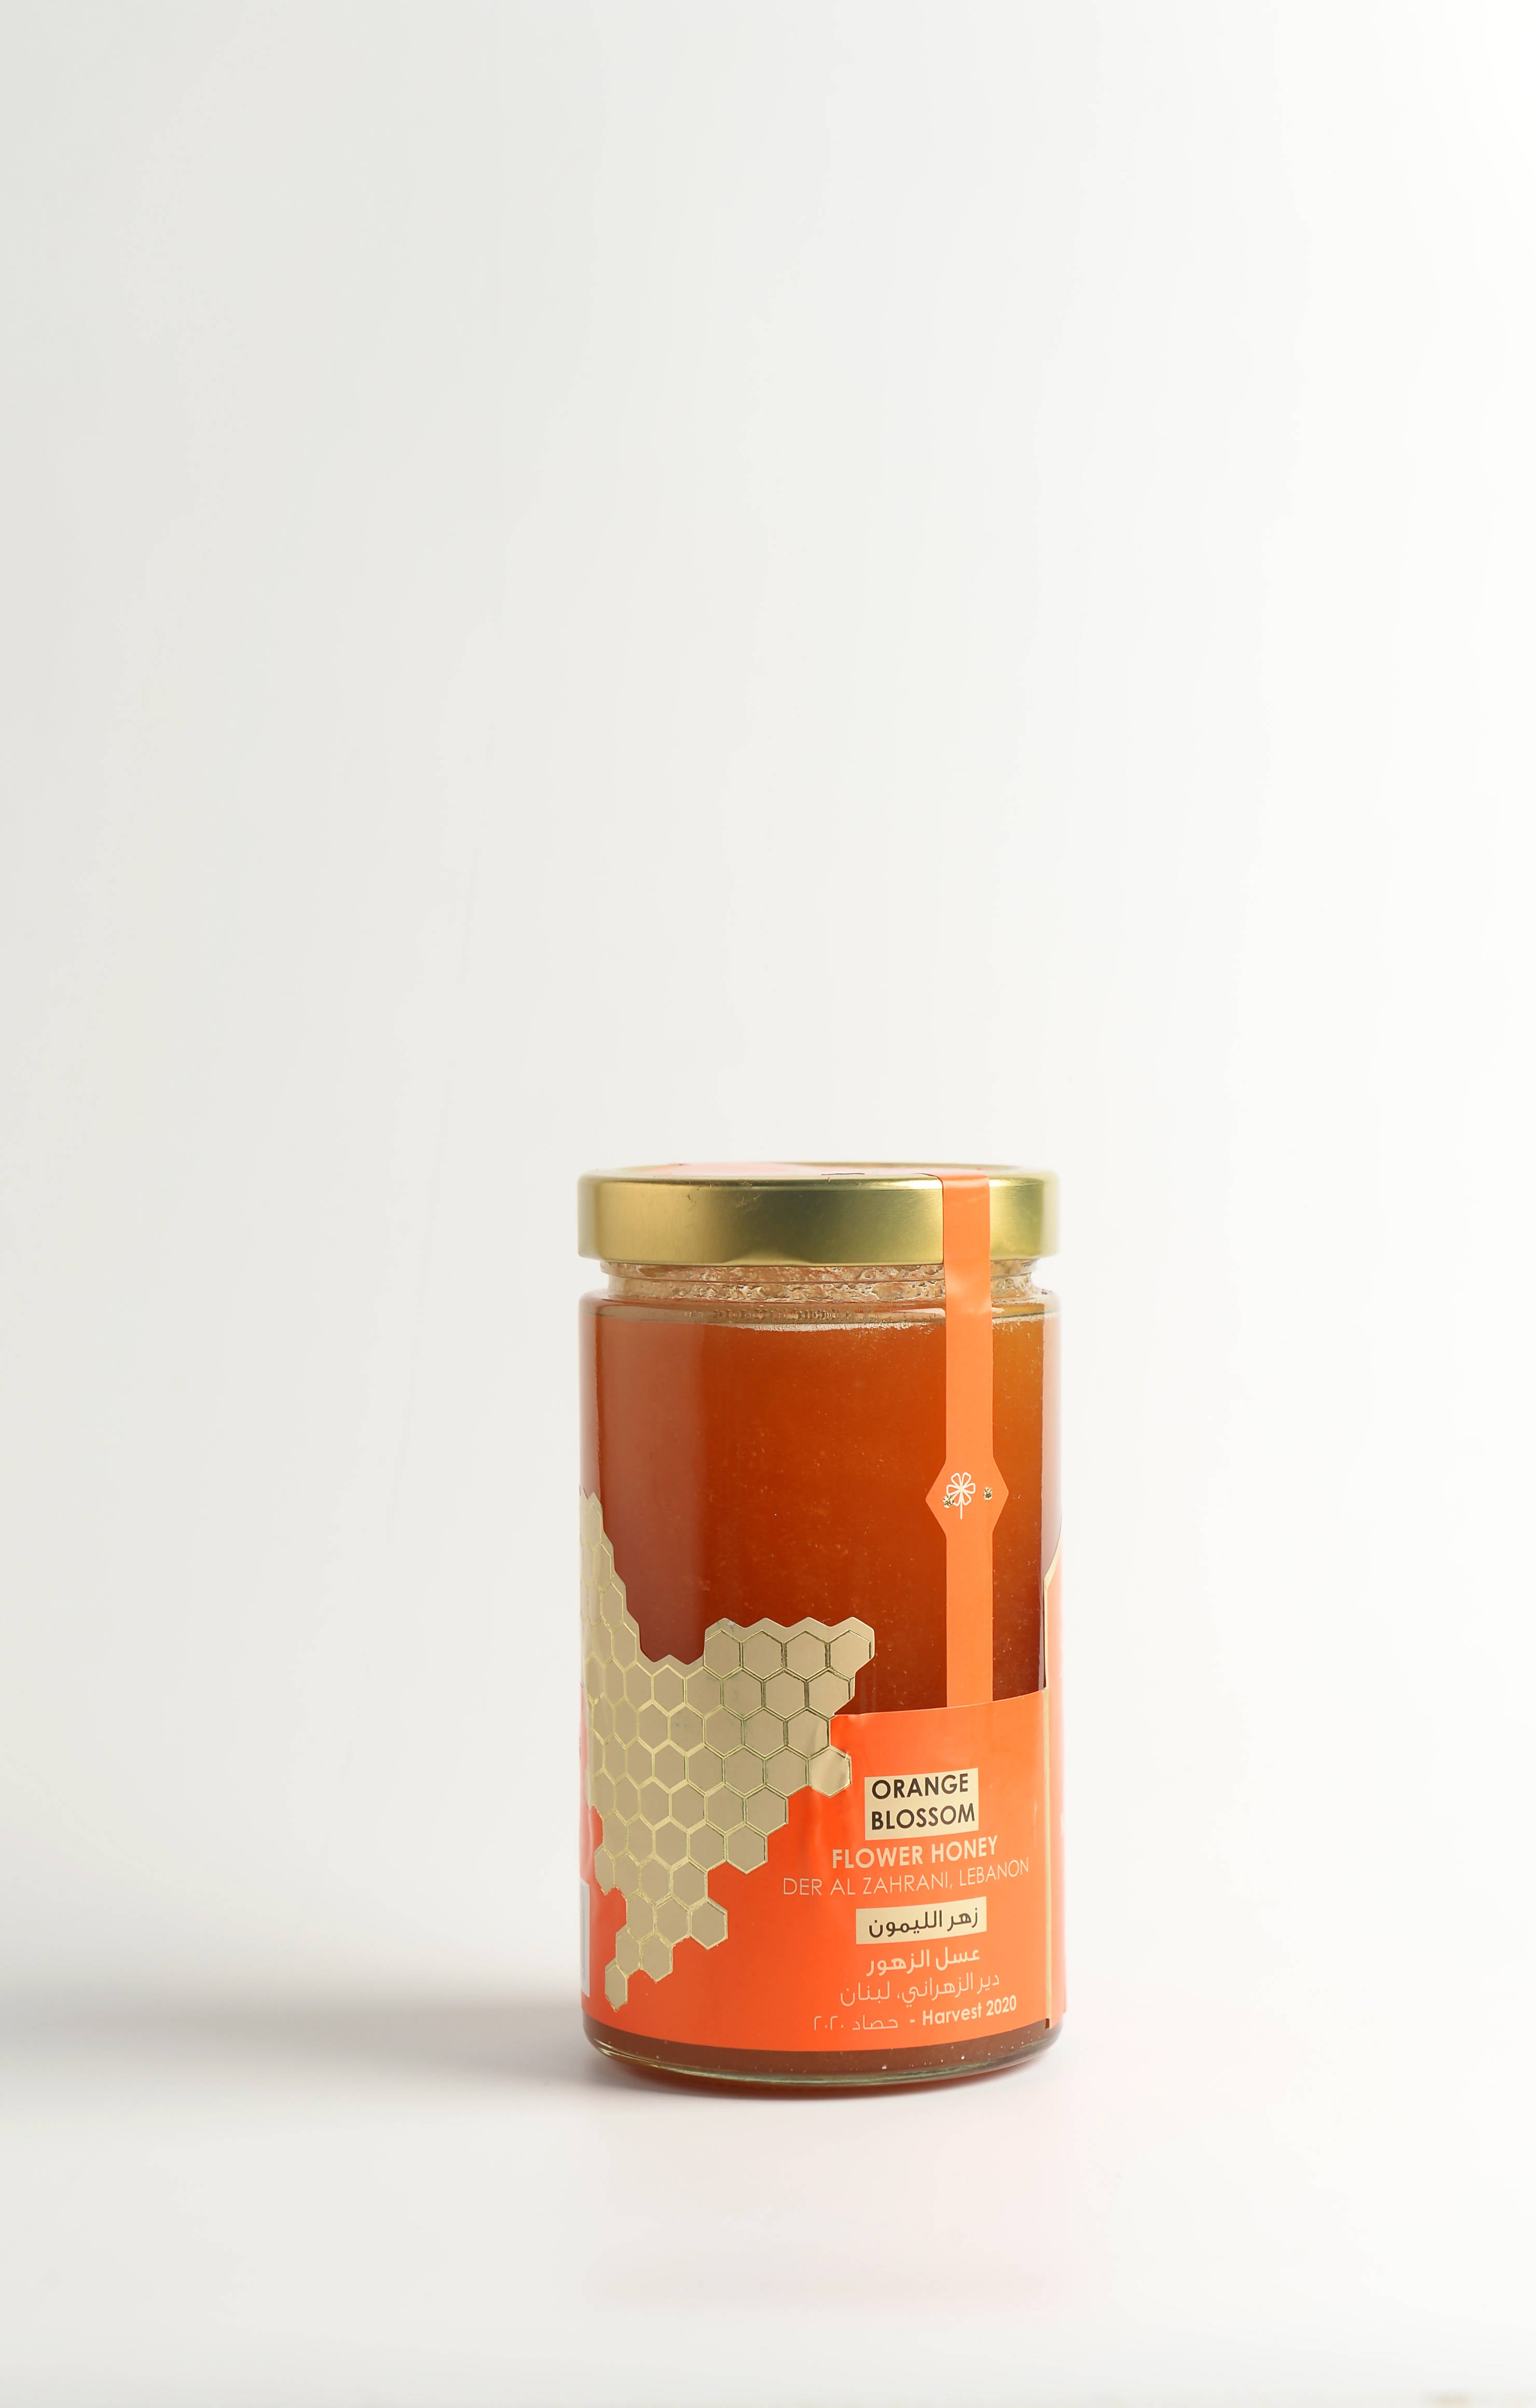 Orchards of Laila's 900g Jar of Luxury Pure Floral Honey - Orange Blossom